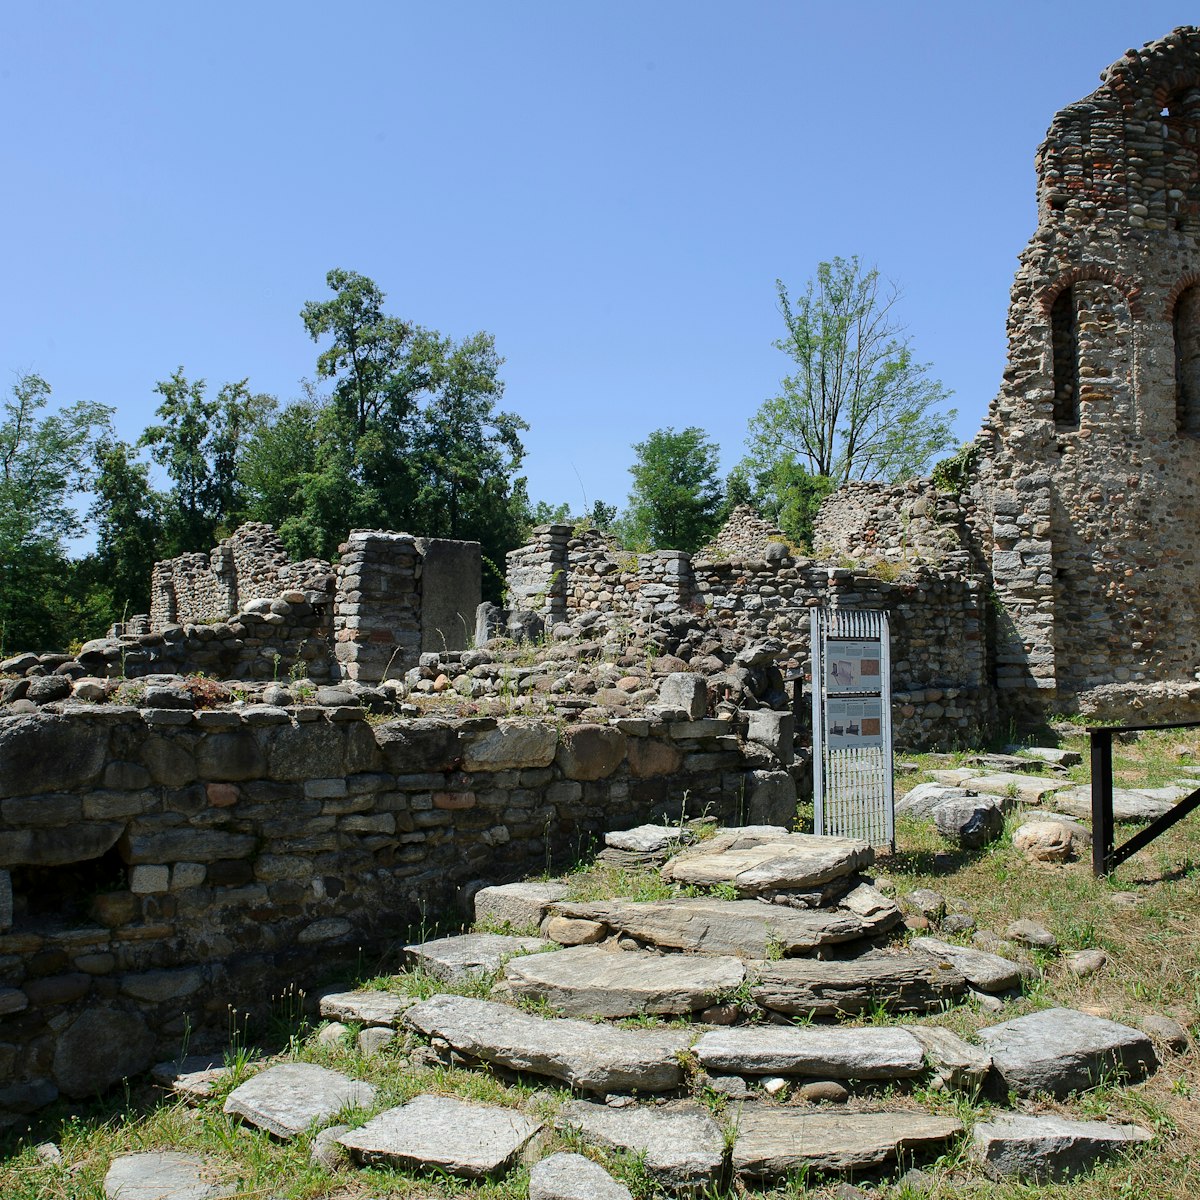 The archaeological area of Castelseprio with the ruins of a village destroyed in the 13th century. 